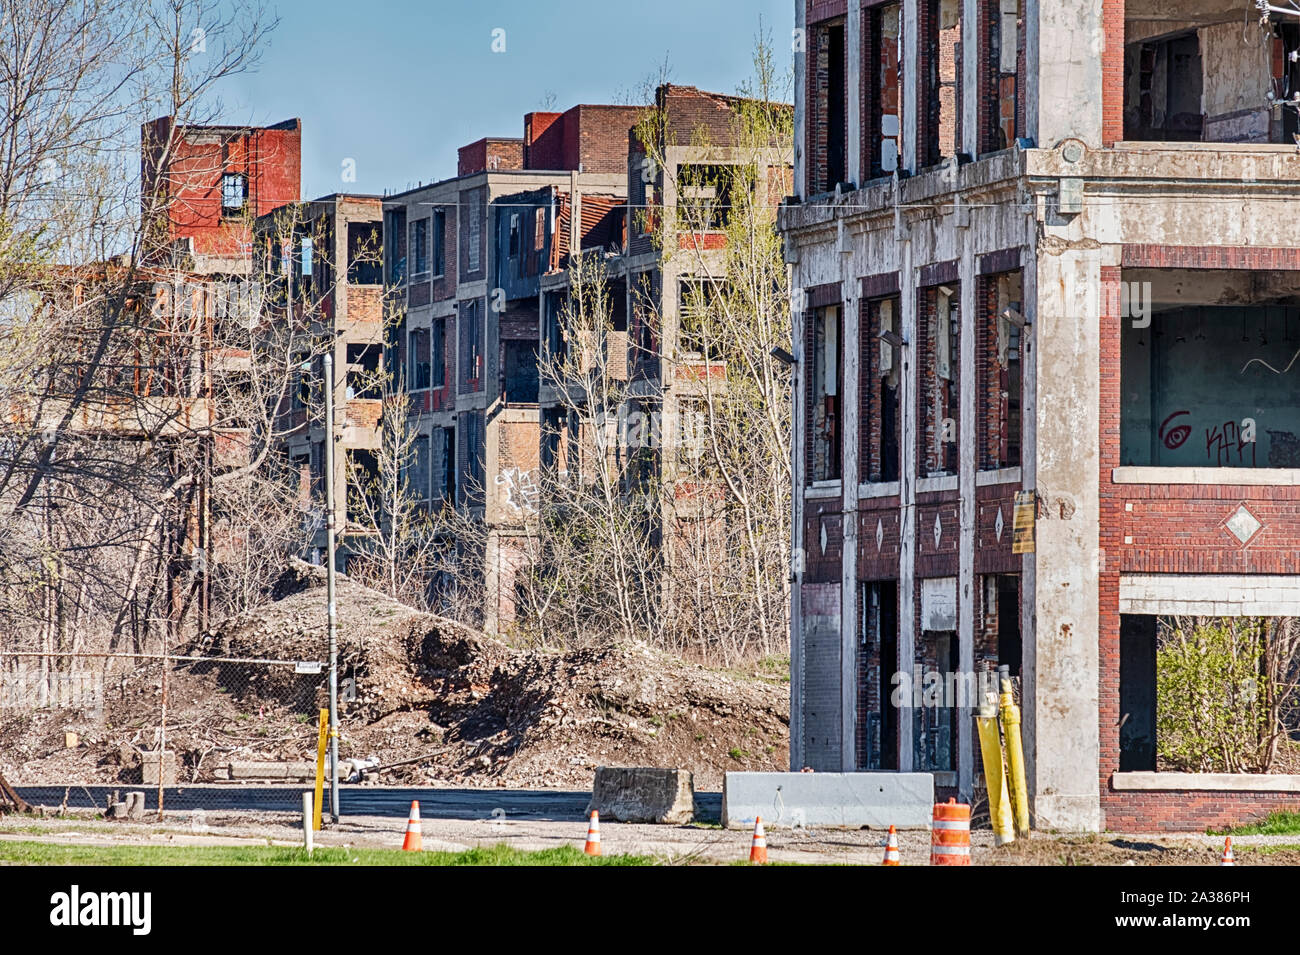 DETROIT, MICHIGAN - APRIL 28, 2019:  The back of the abandoned Packard Motor Company factory in Detroit is in ruins. Stock Photo